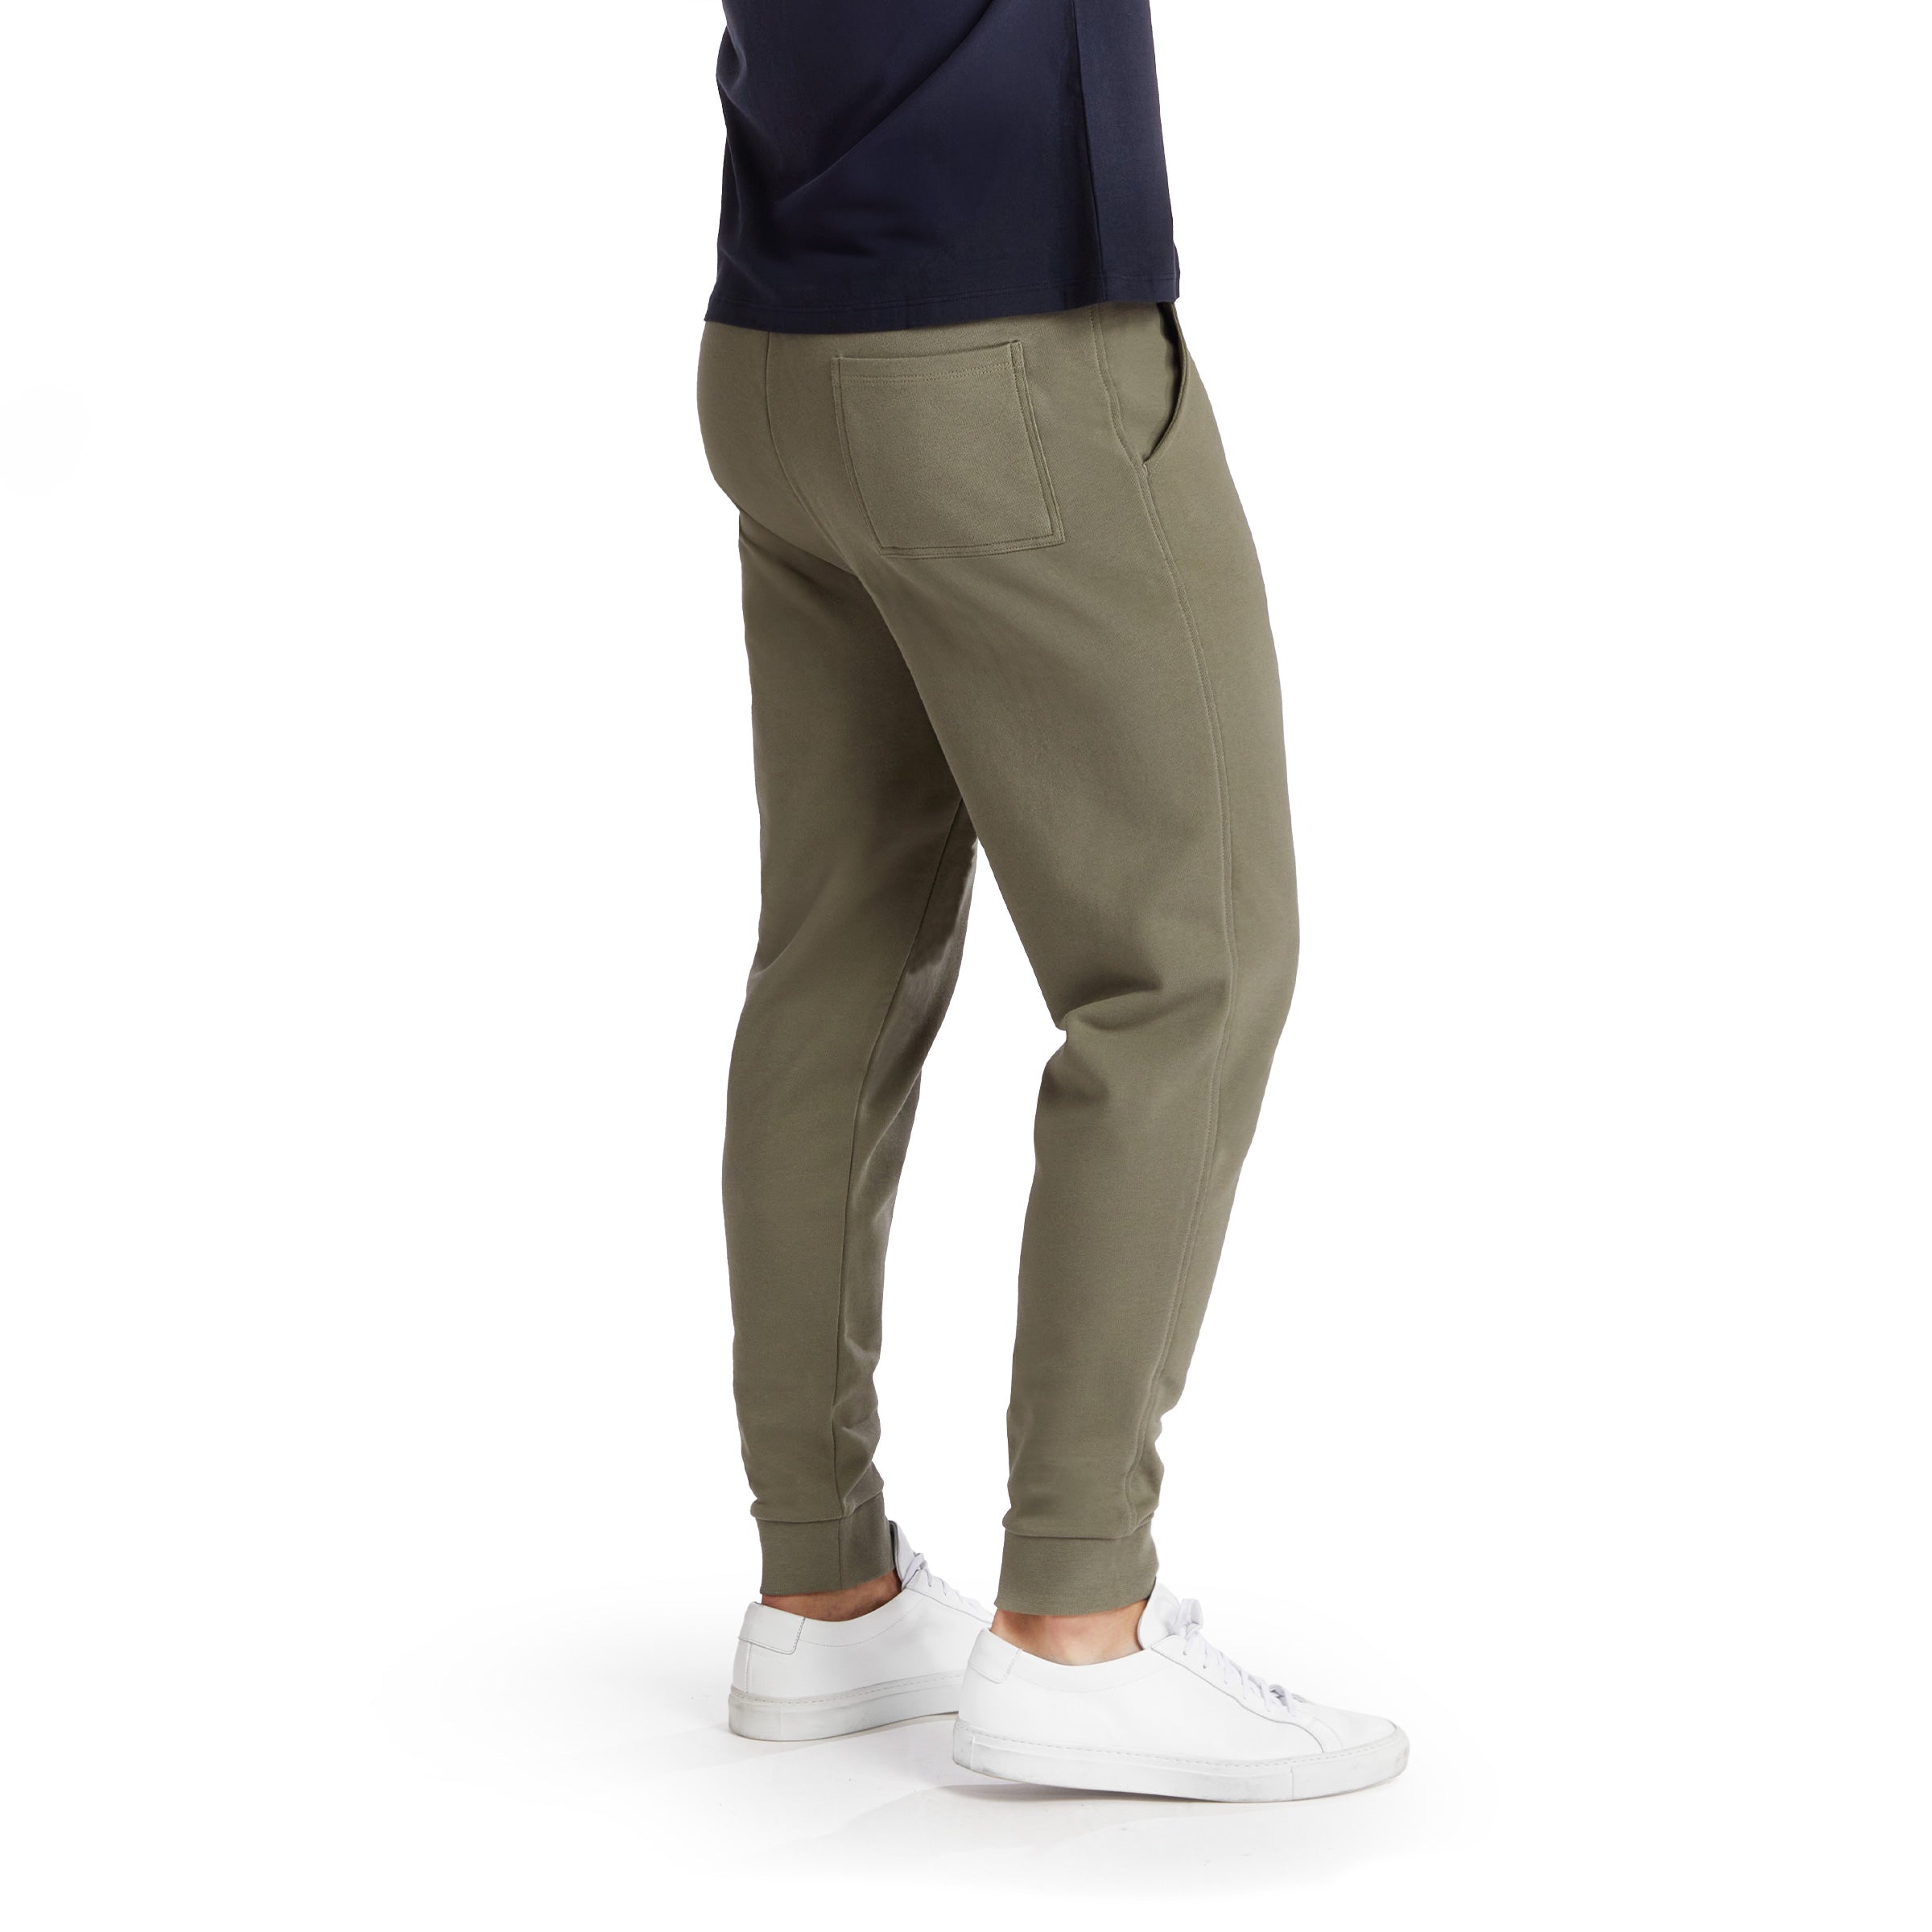 Men wearing Olive The French Terry Sweatpant Hooper